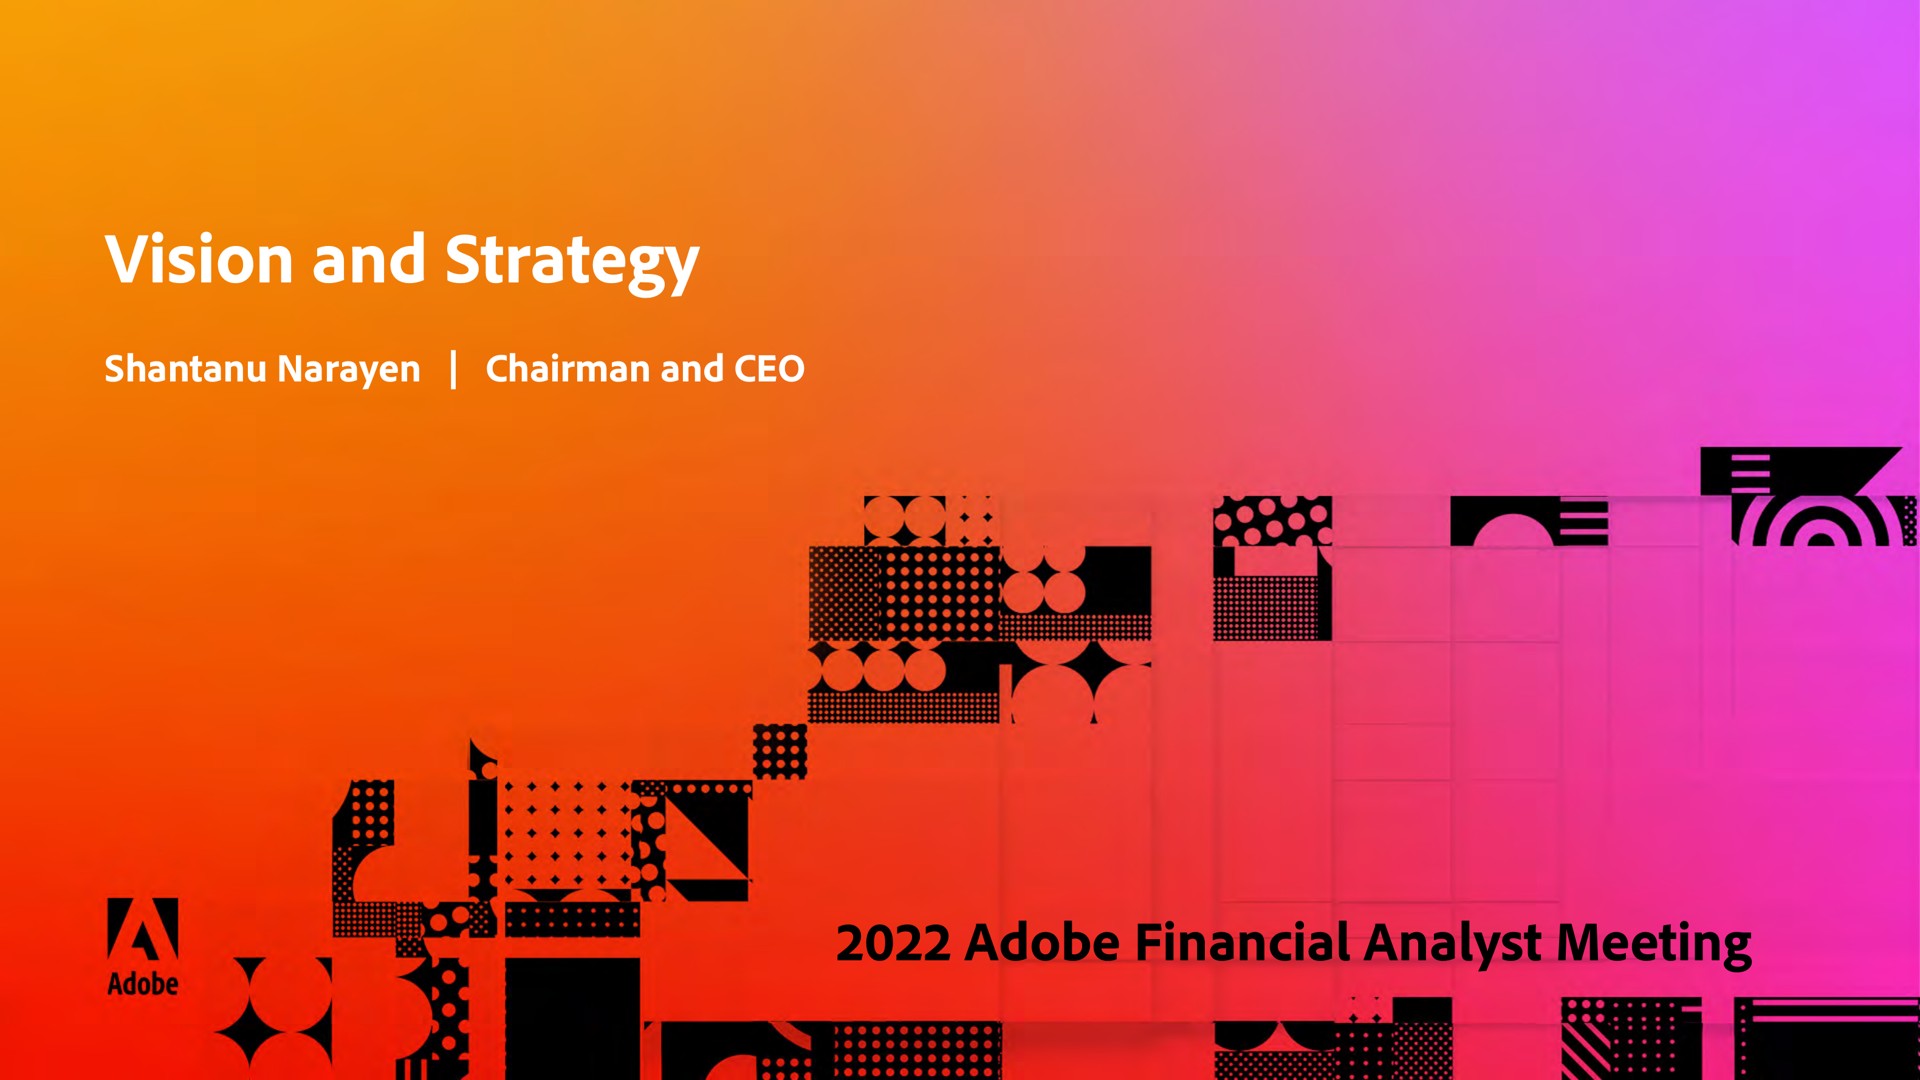 vision and strategy adobe financial analyst meeting | Adobe